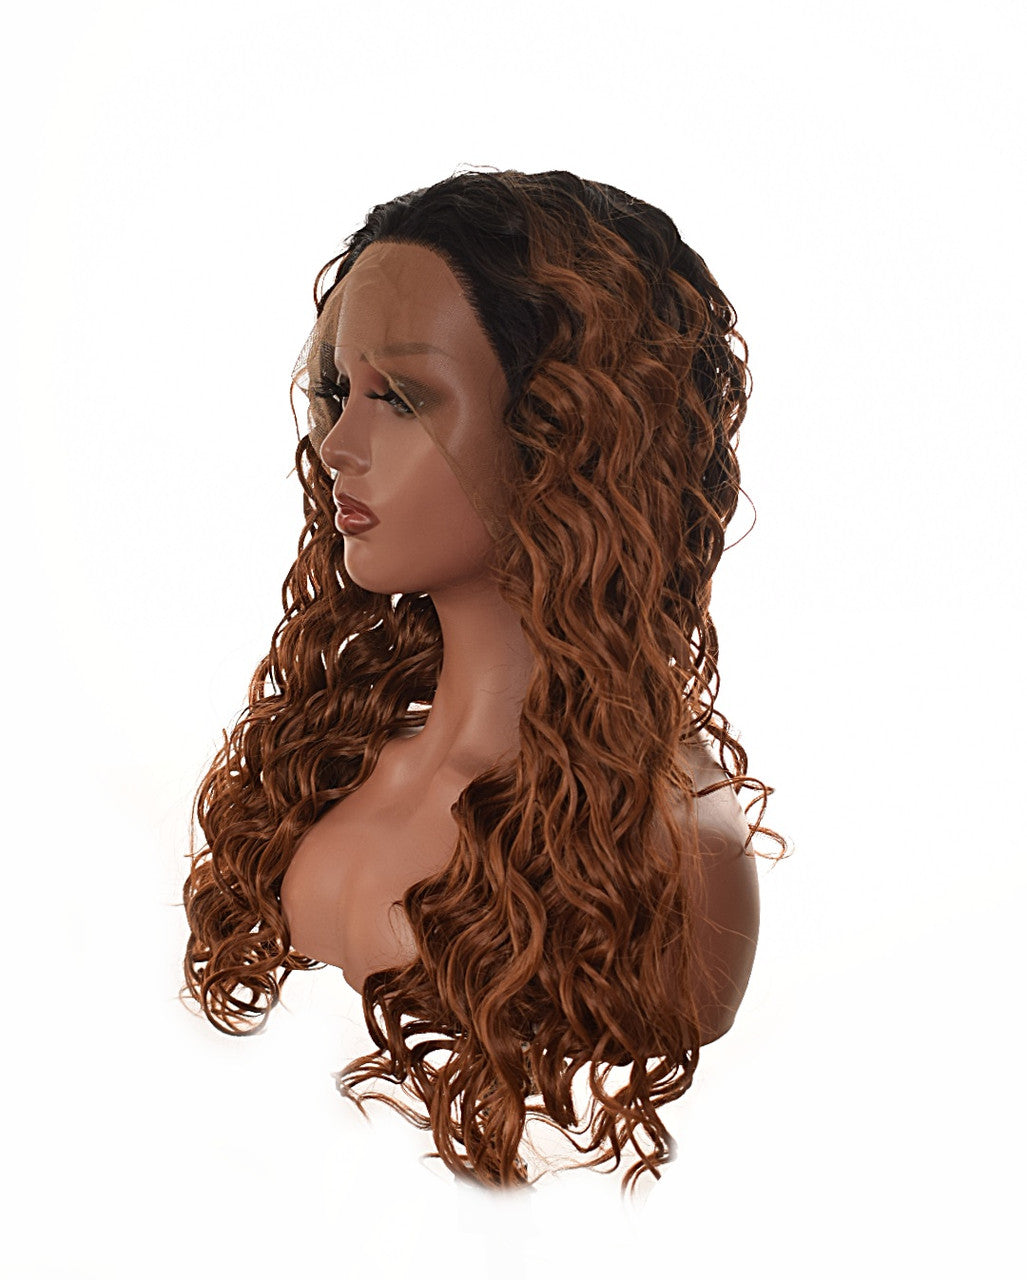  Black Caramel Brown Ombre Wet Curl Lace Front Wig.  Kiki